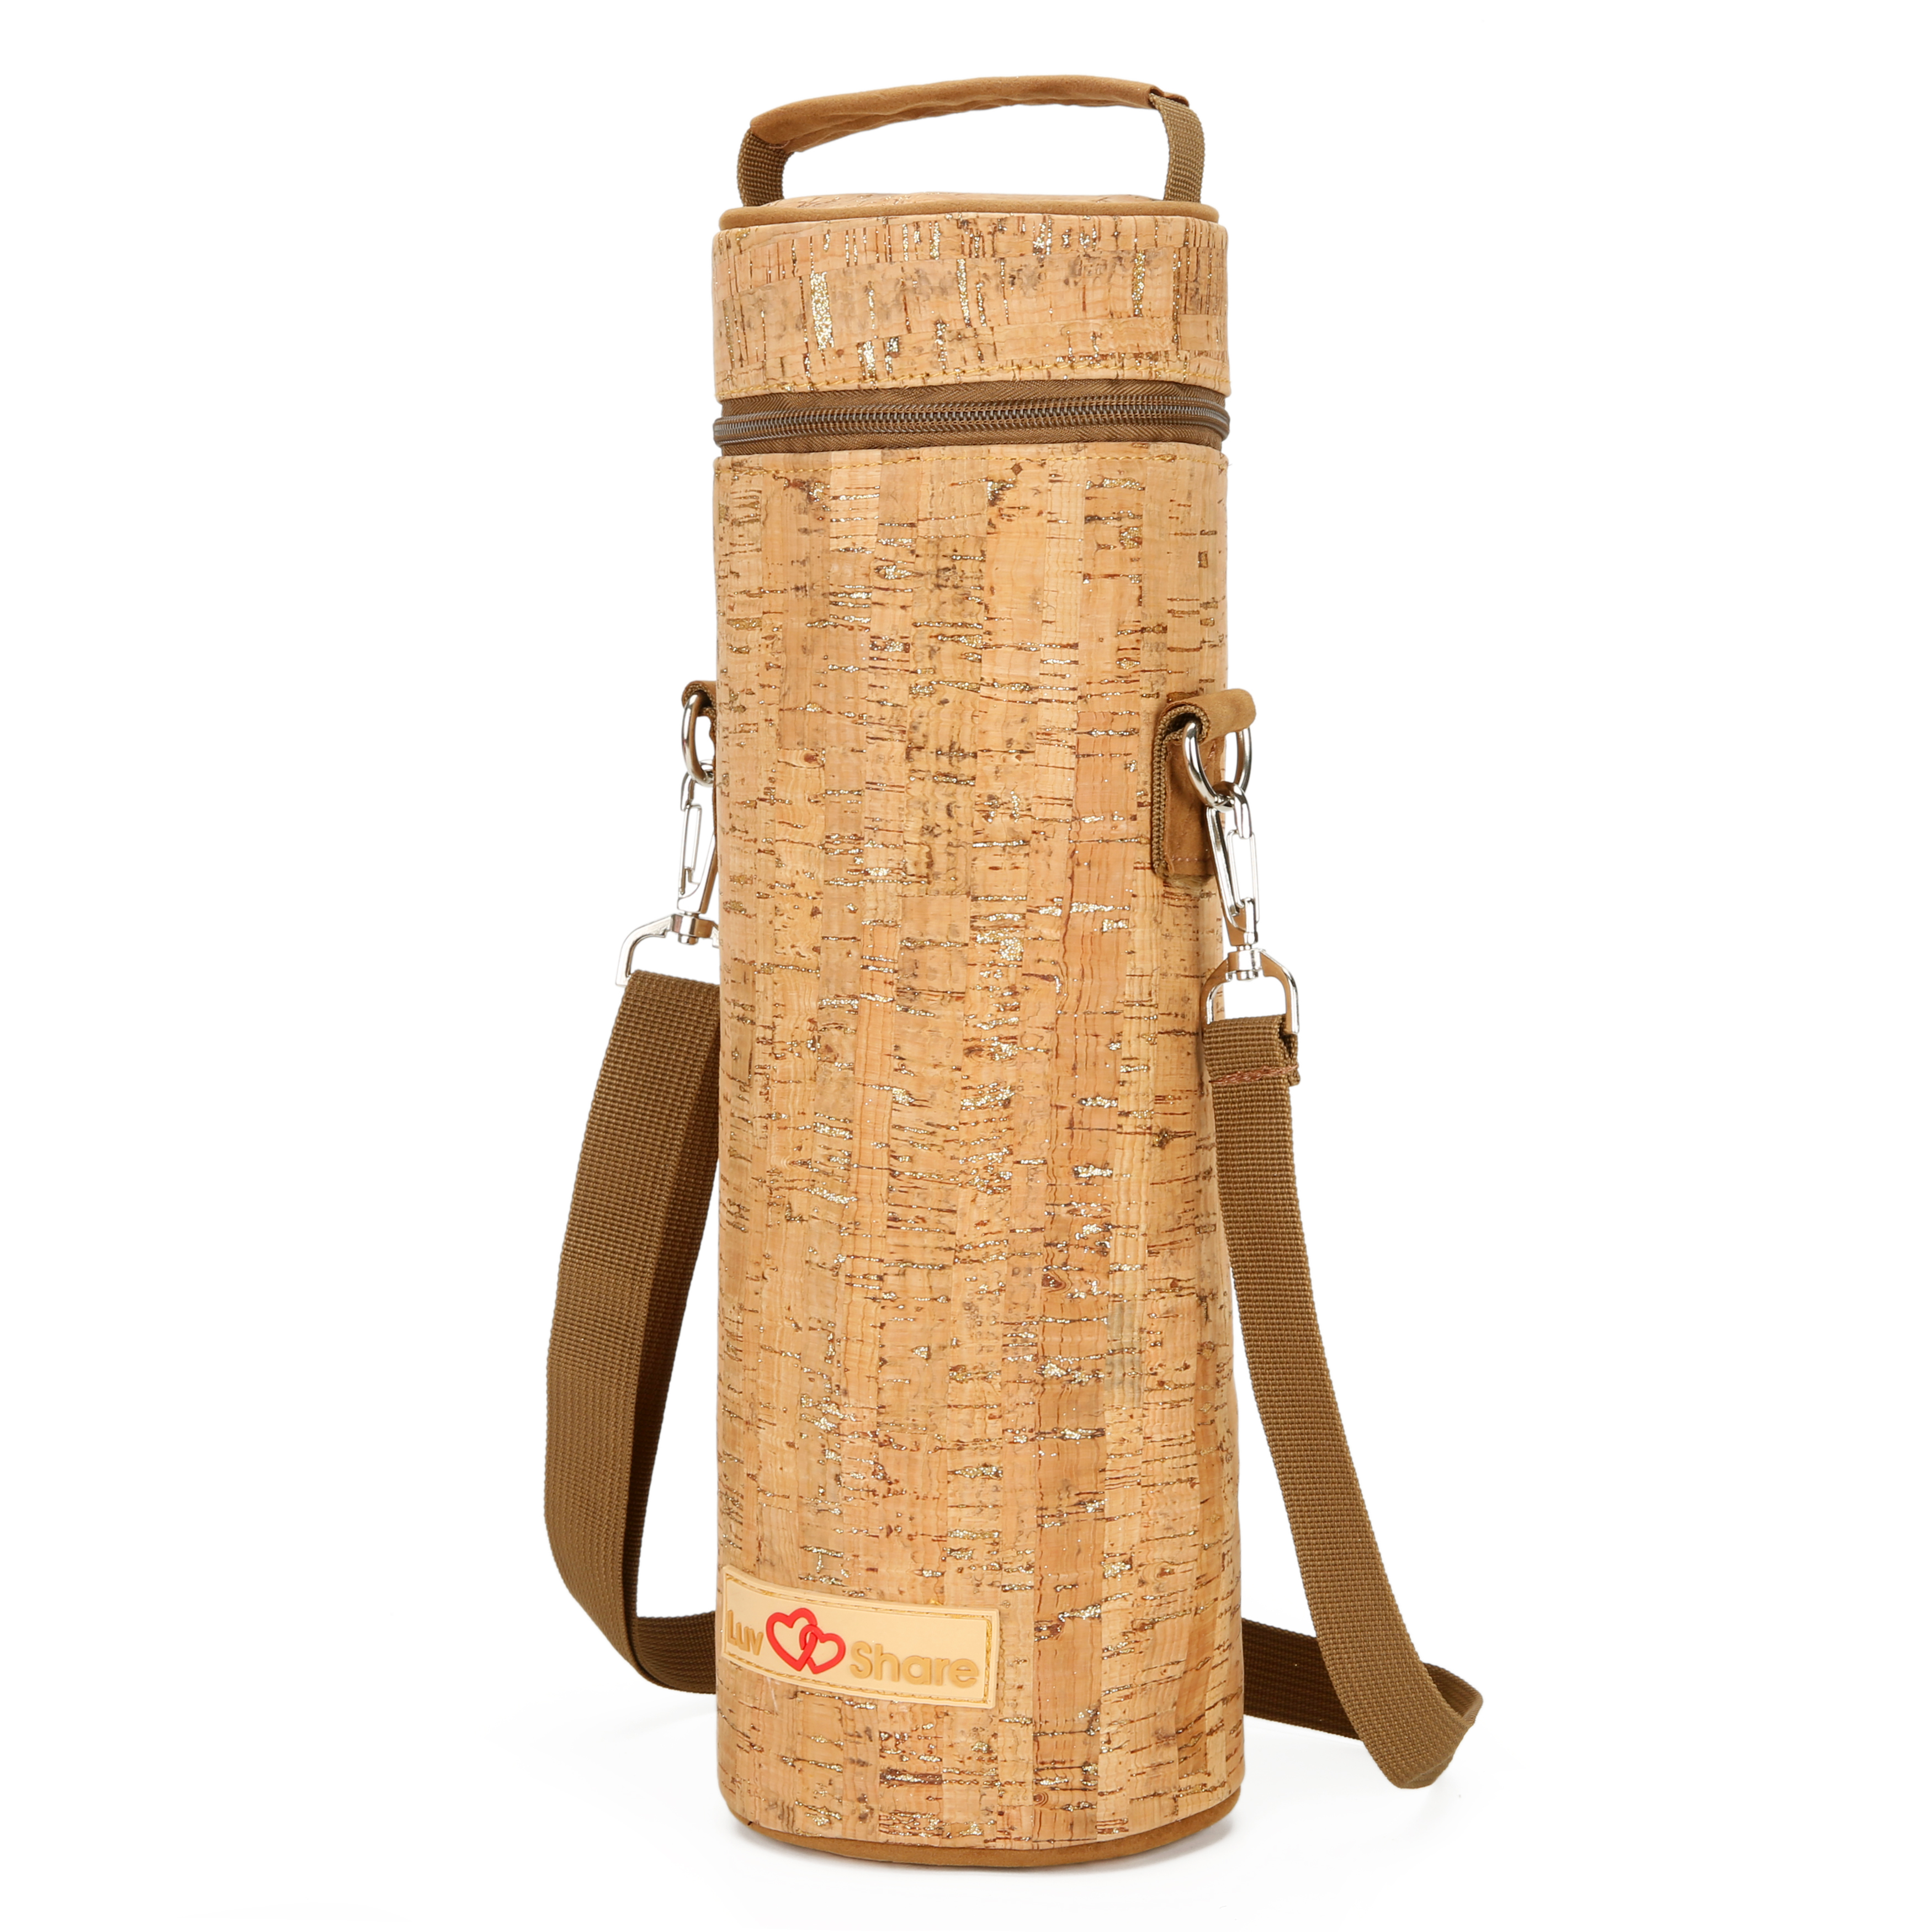  Insulated Wine Carrier Tote Cork wine cooler bags